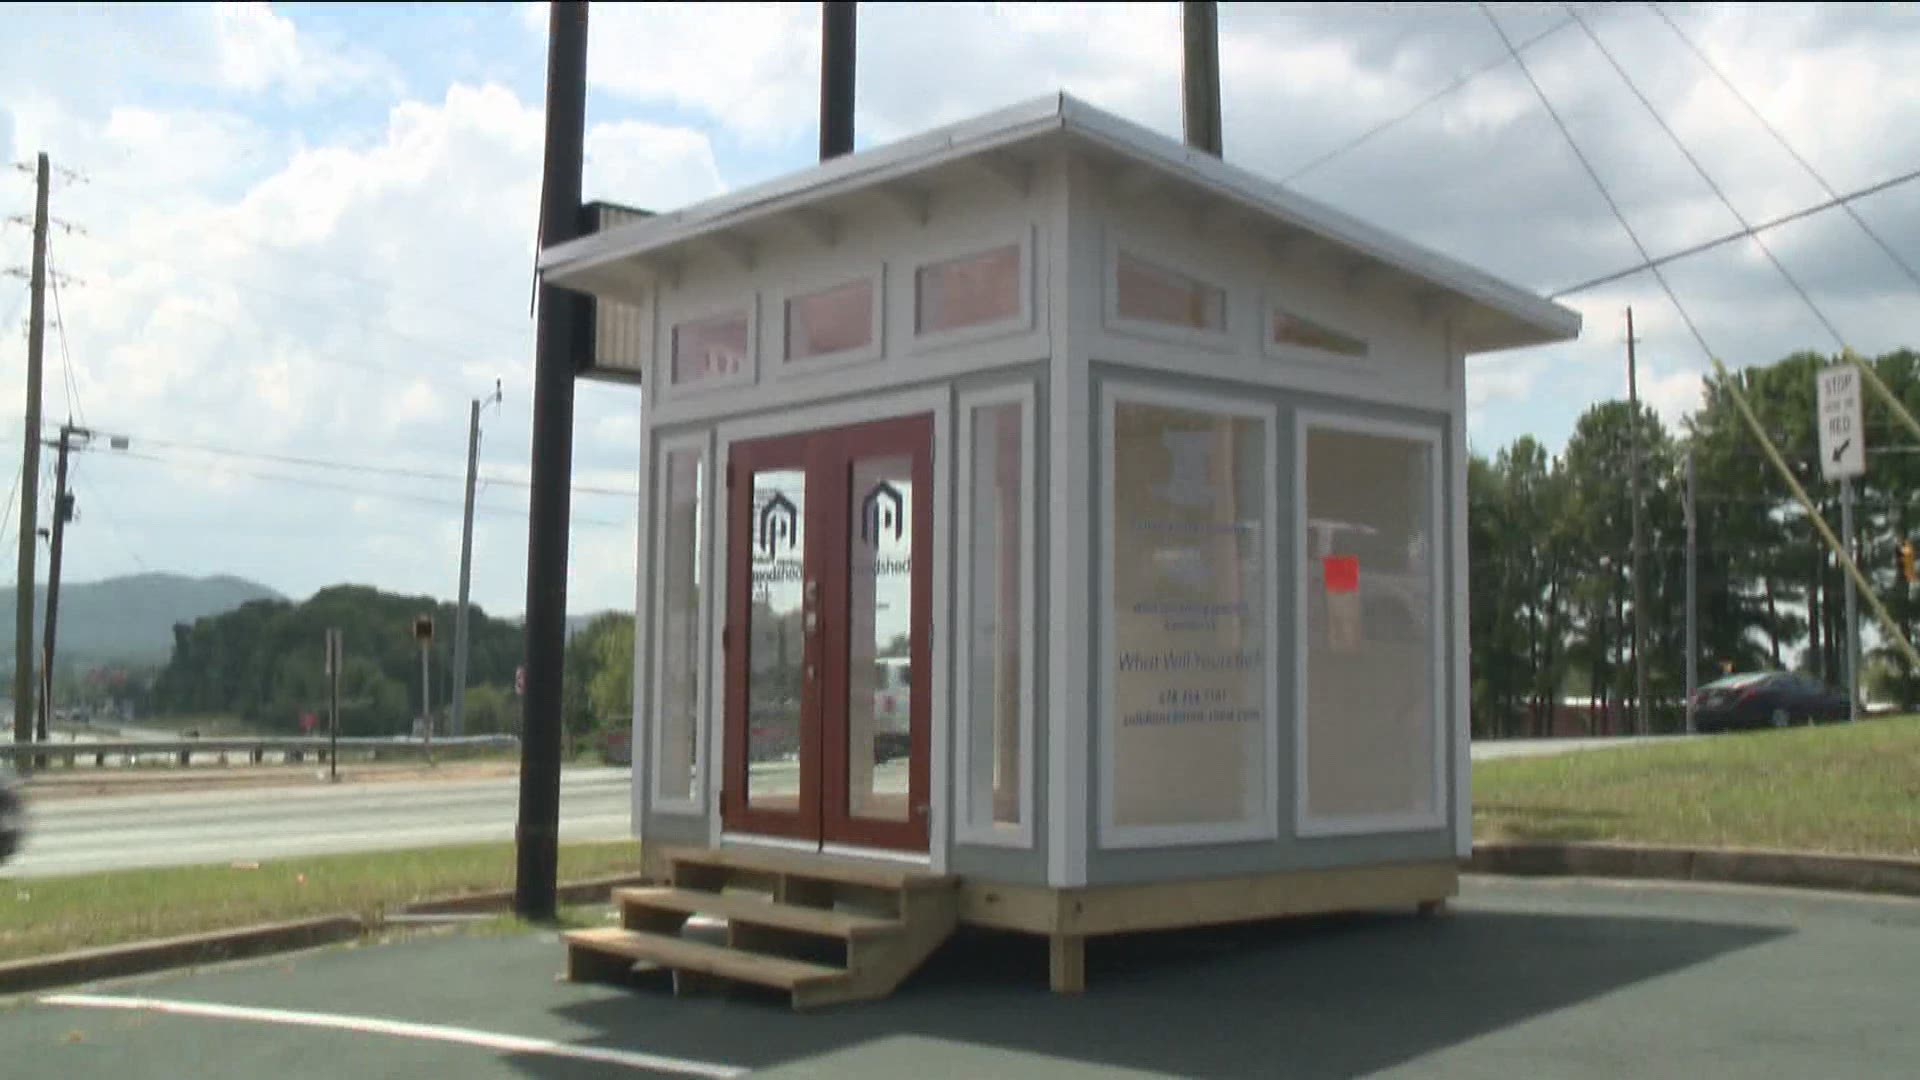 With no money left to get the word out that they changed their business, they hoped that putting this shed into a parking lot would help. Then, another problem came.